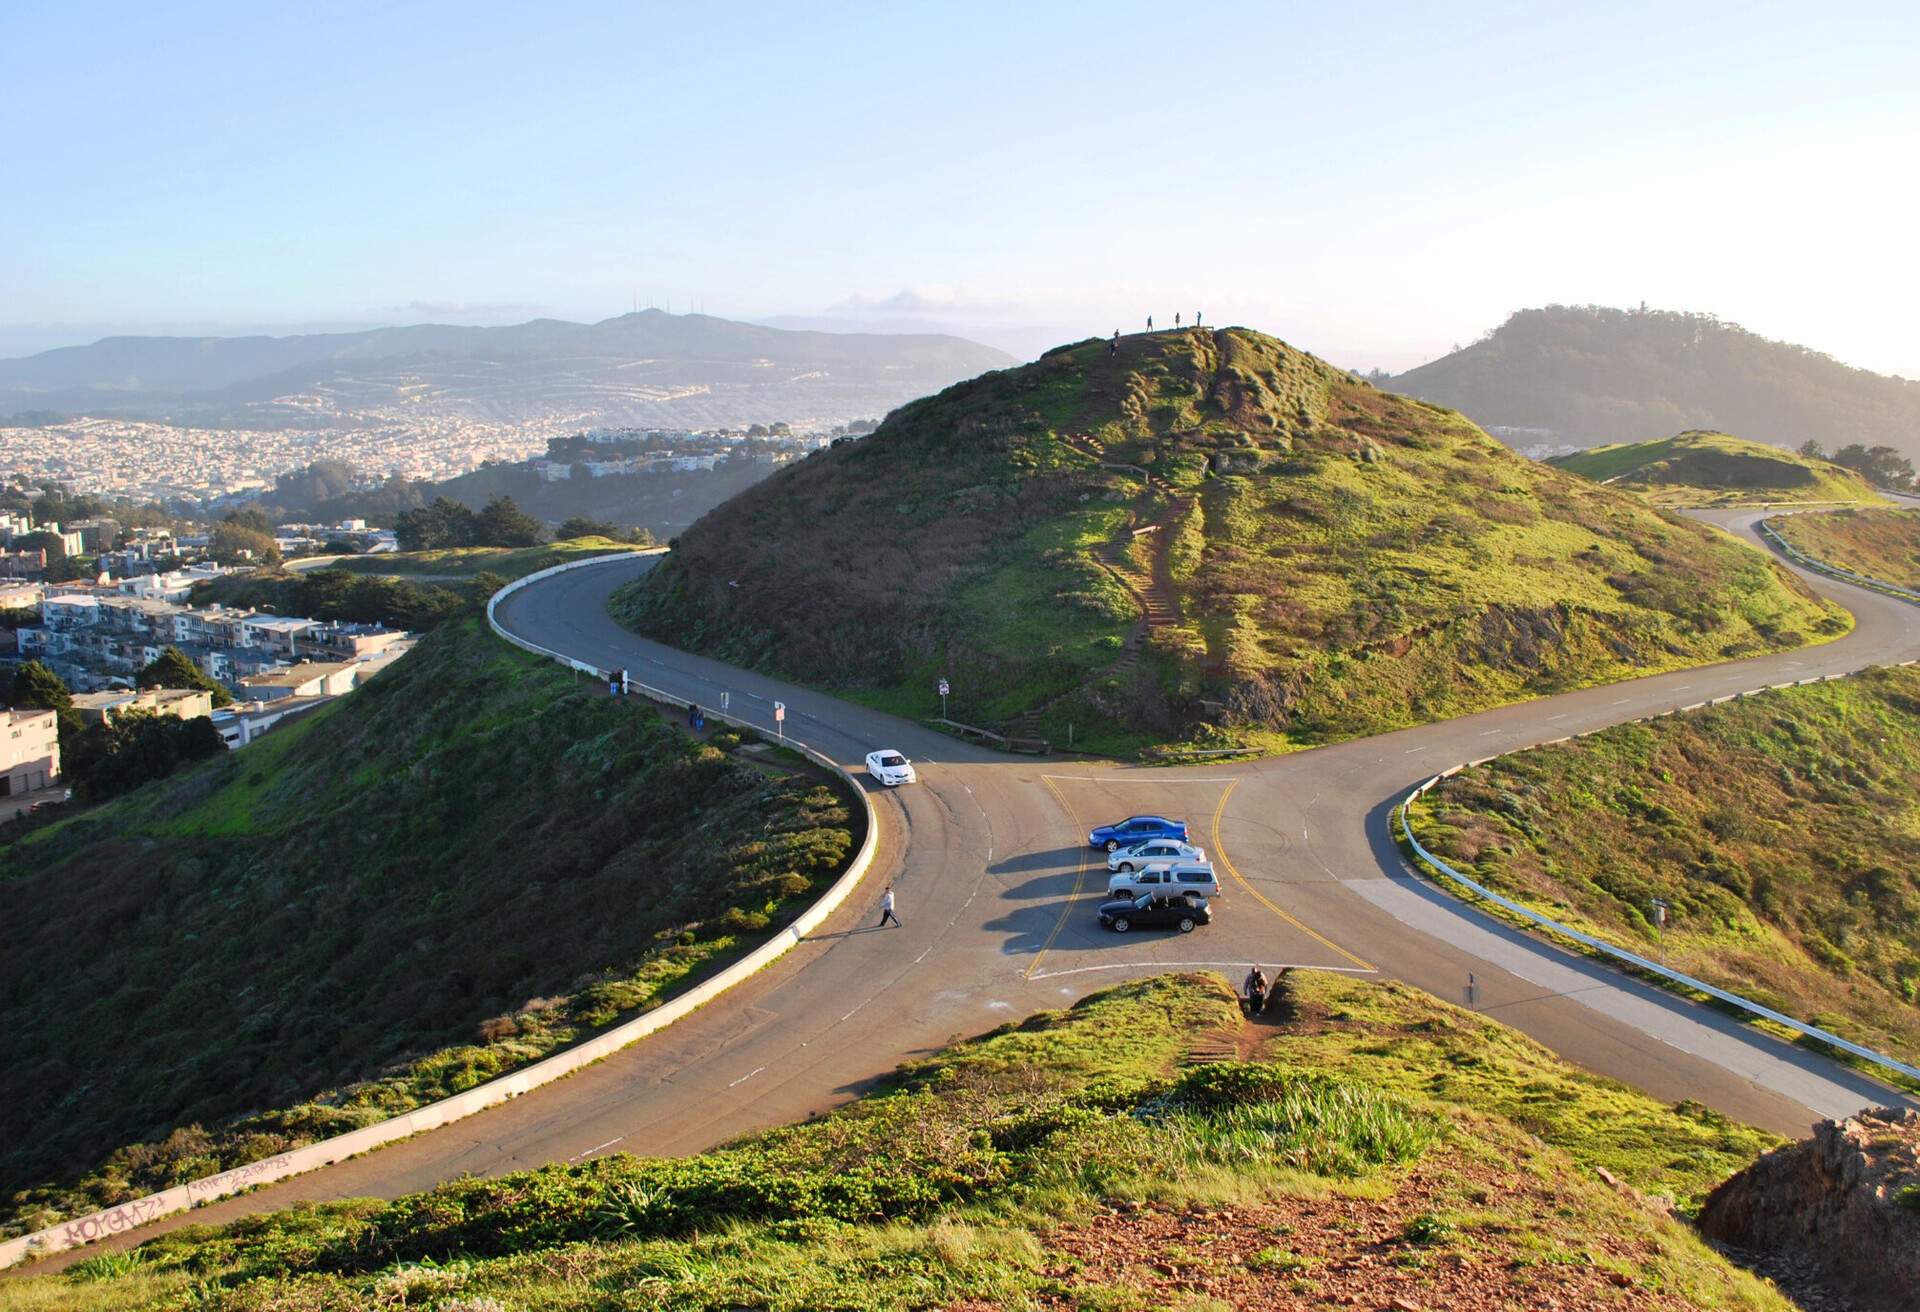 DEST_USA_CALIFORNIA_SAN-FRANCISCO_TWIN-PEAKS_GettyImages-900016050